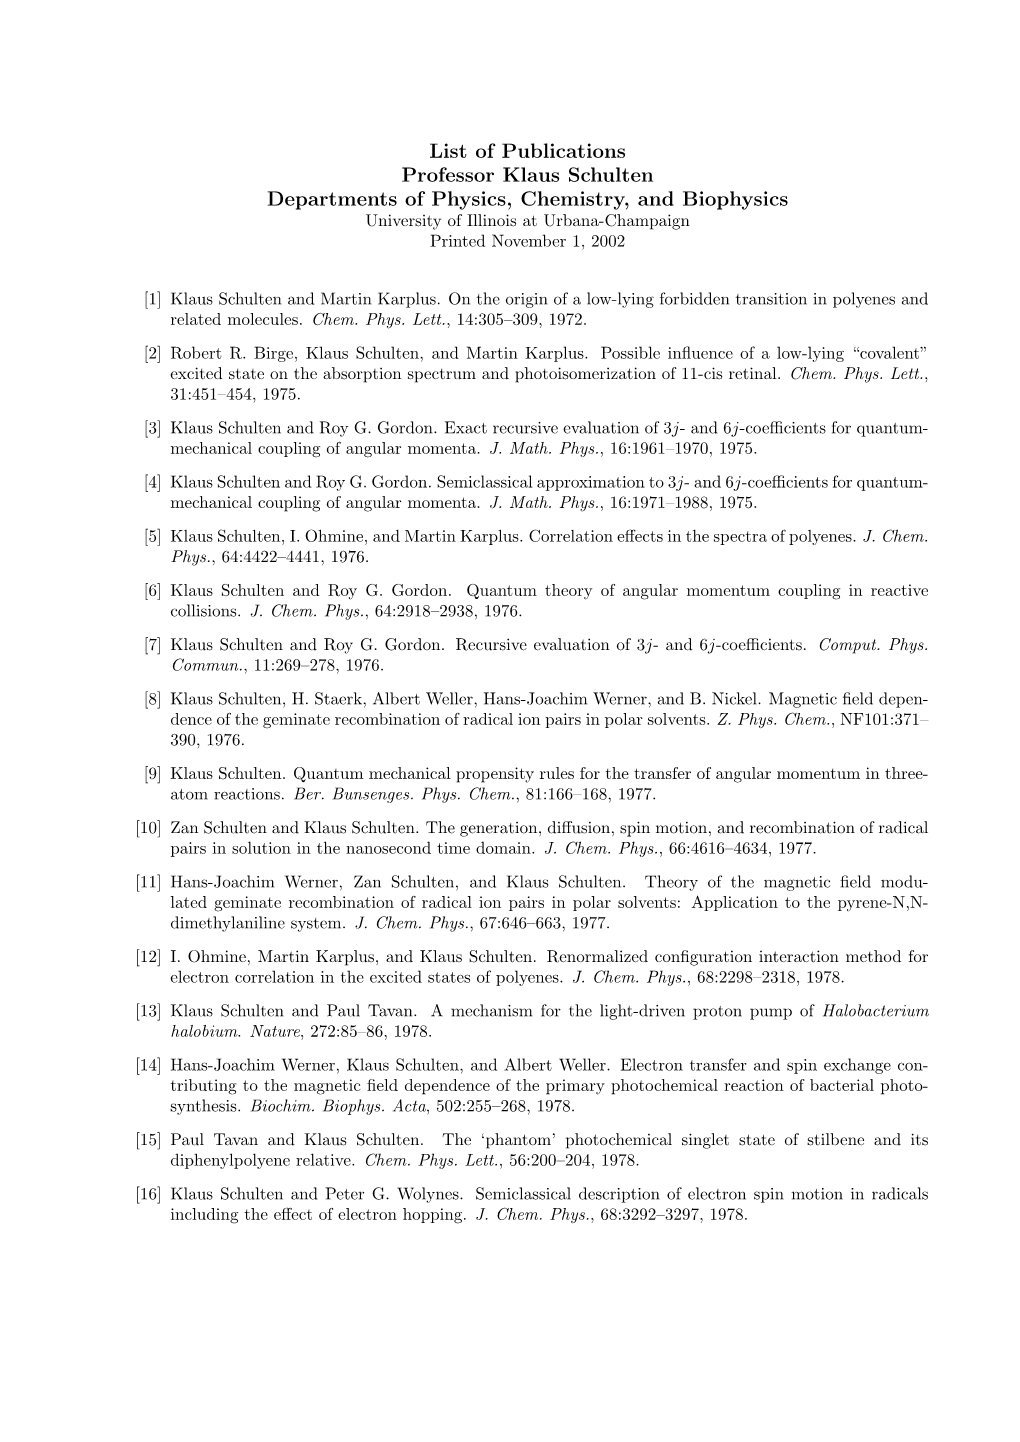 List of Publications Professor Klaus Schulten Departments of Physics, Chemistry, and Biophysics University of Illinois at Urbana-Champaign Printed November 1, 2002